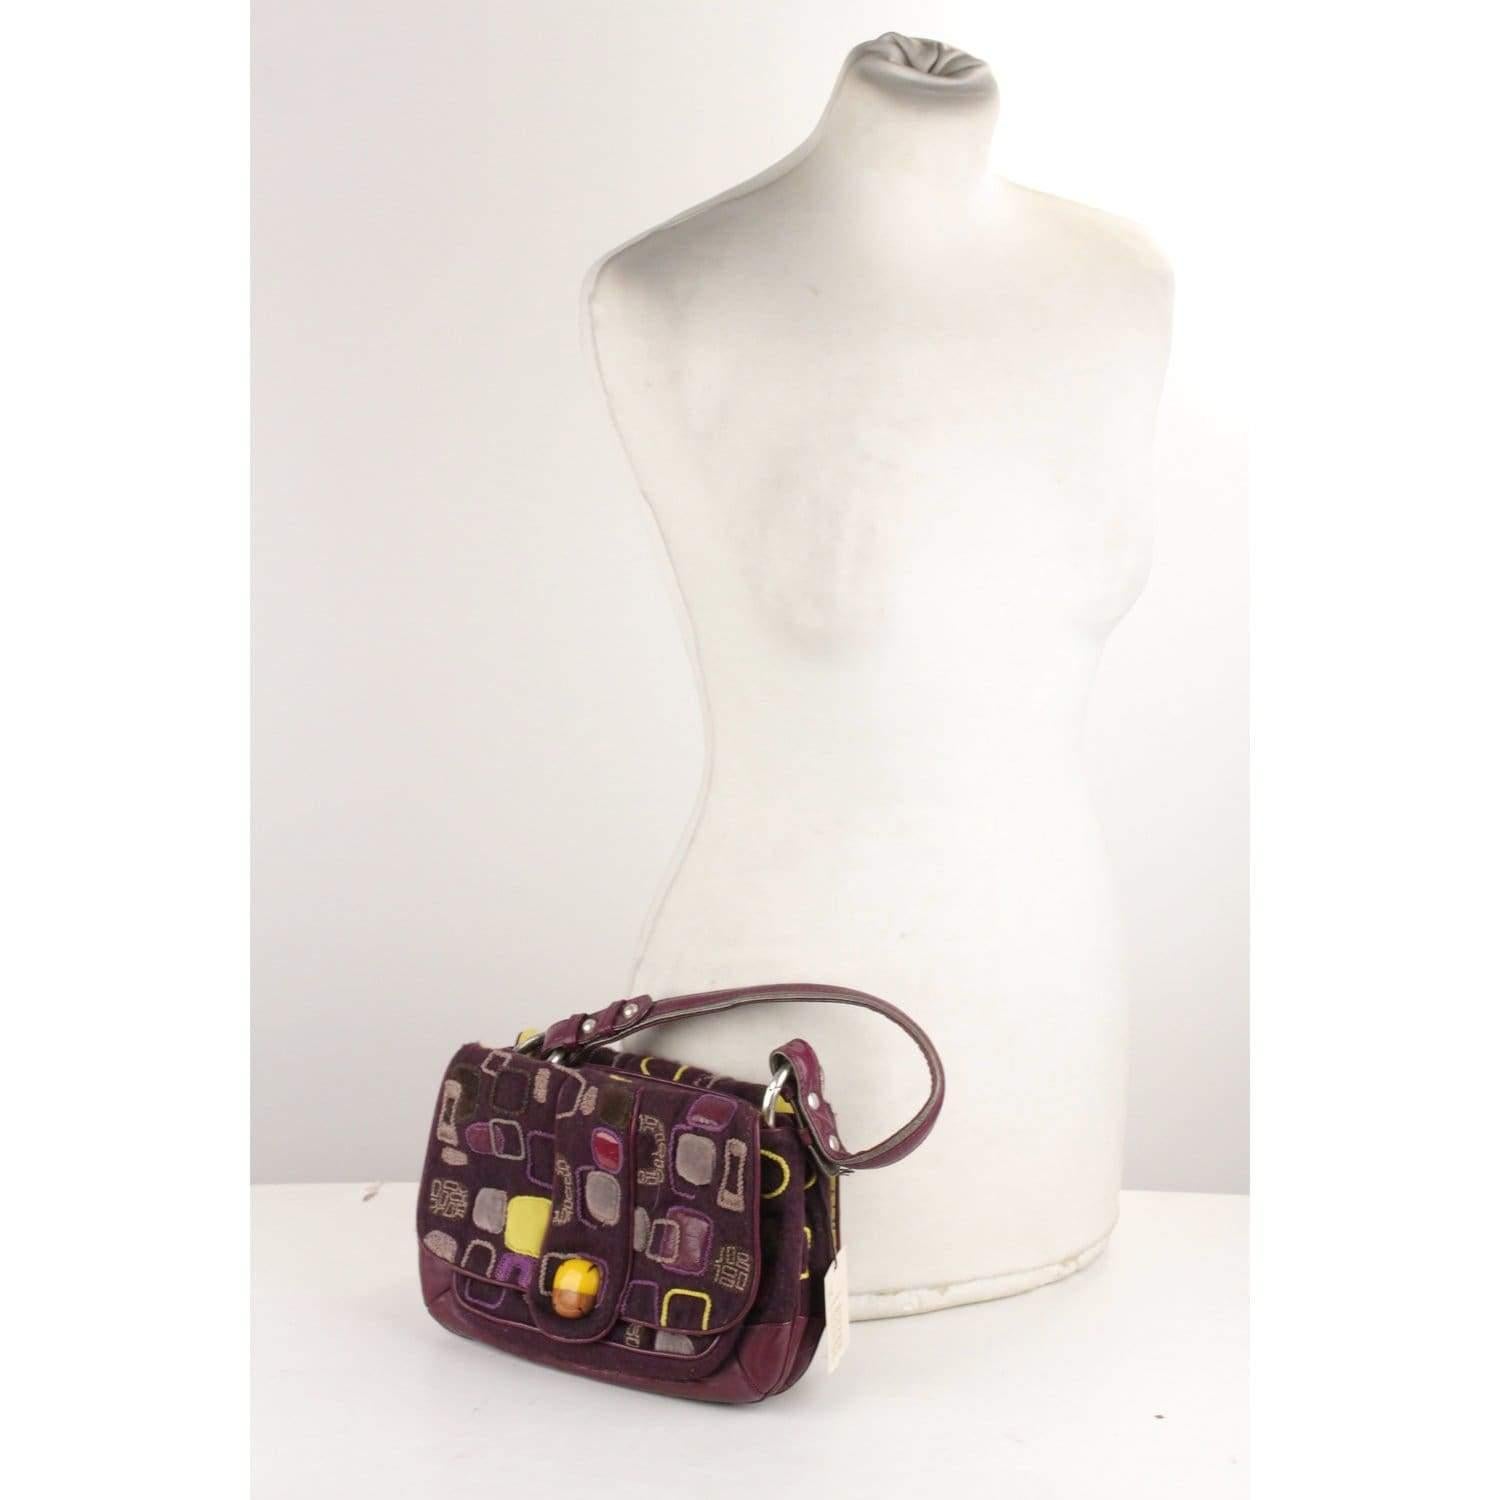 MATERIAL: Fabric, Patent Leather COLOR: Purple MODEL: Shoulder Bag GENDER: Women SIZE: Small CONDITION DETAILS: B :GOOD CONDITION - Some light wear of use - some normal wear of use on fabric (light pilling), some darkness on the hardware